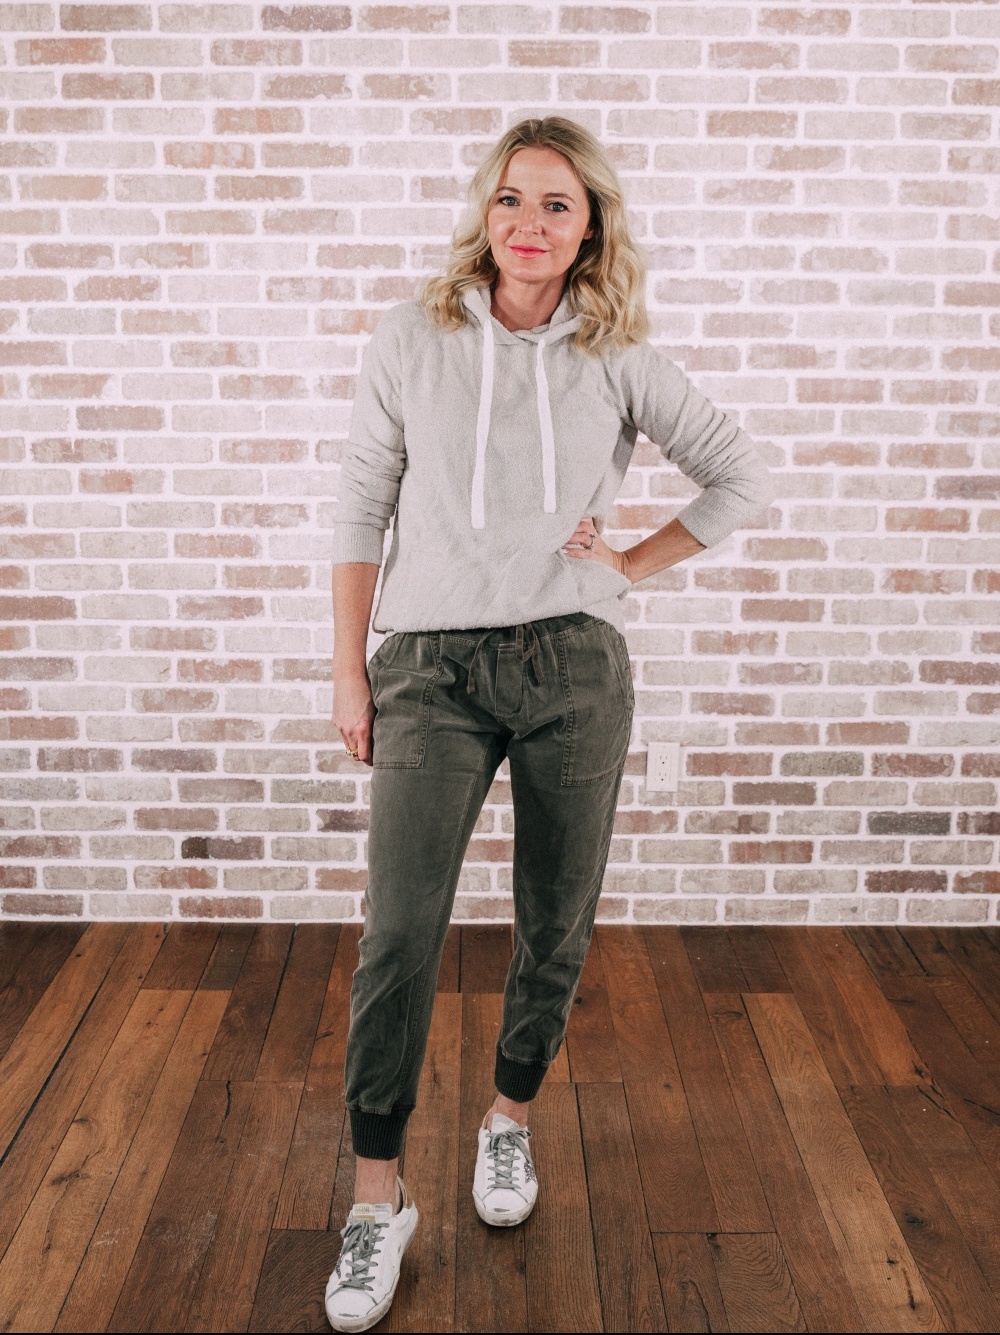 How To Wear The Popular Utility Fashion Trend | Busbee Style